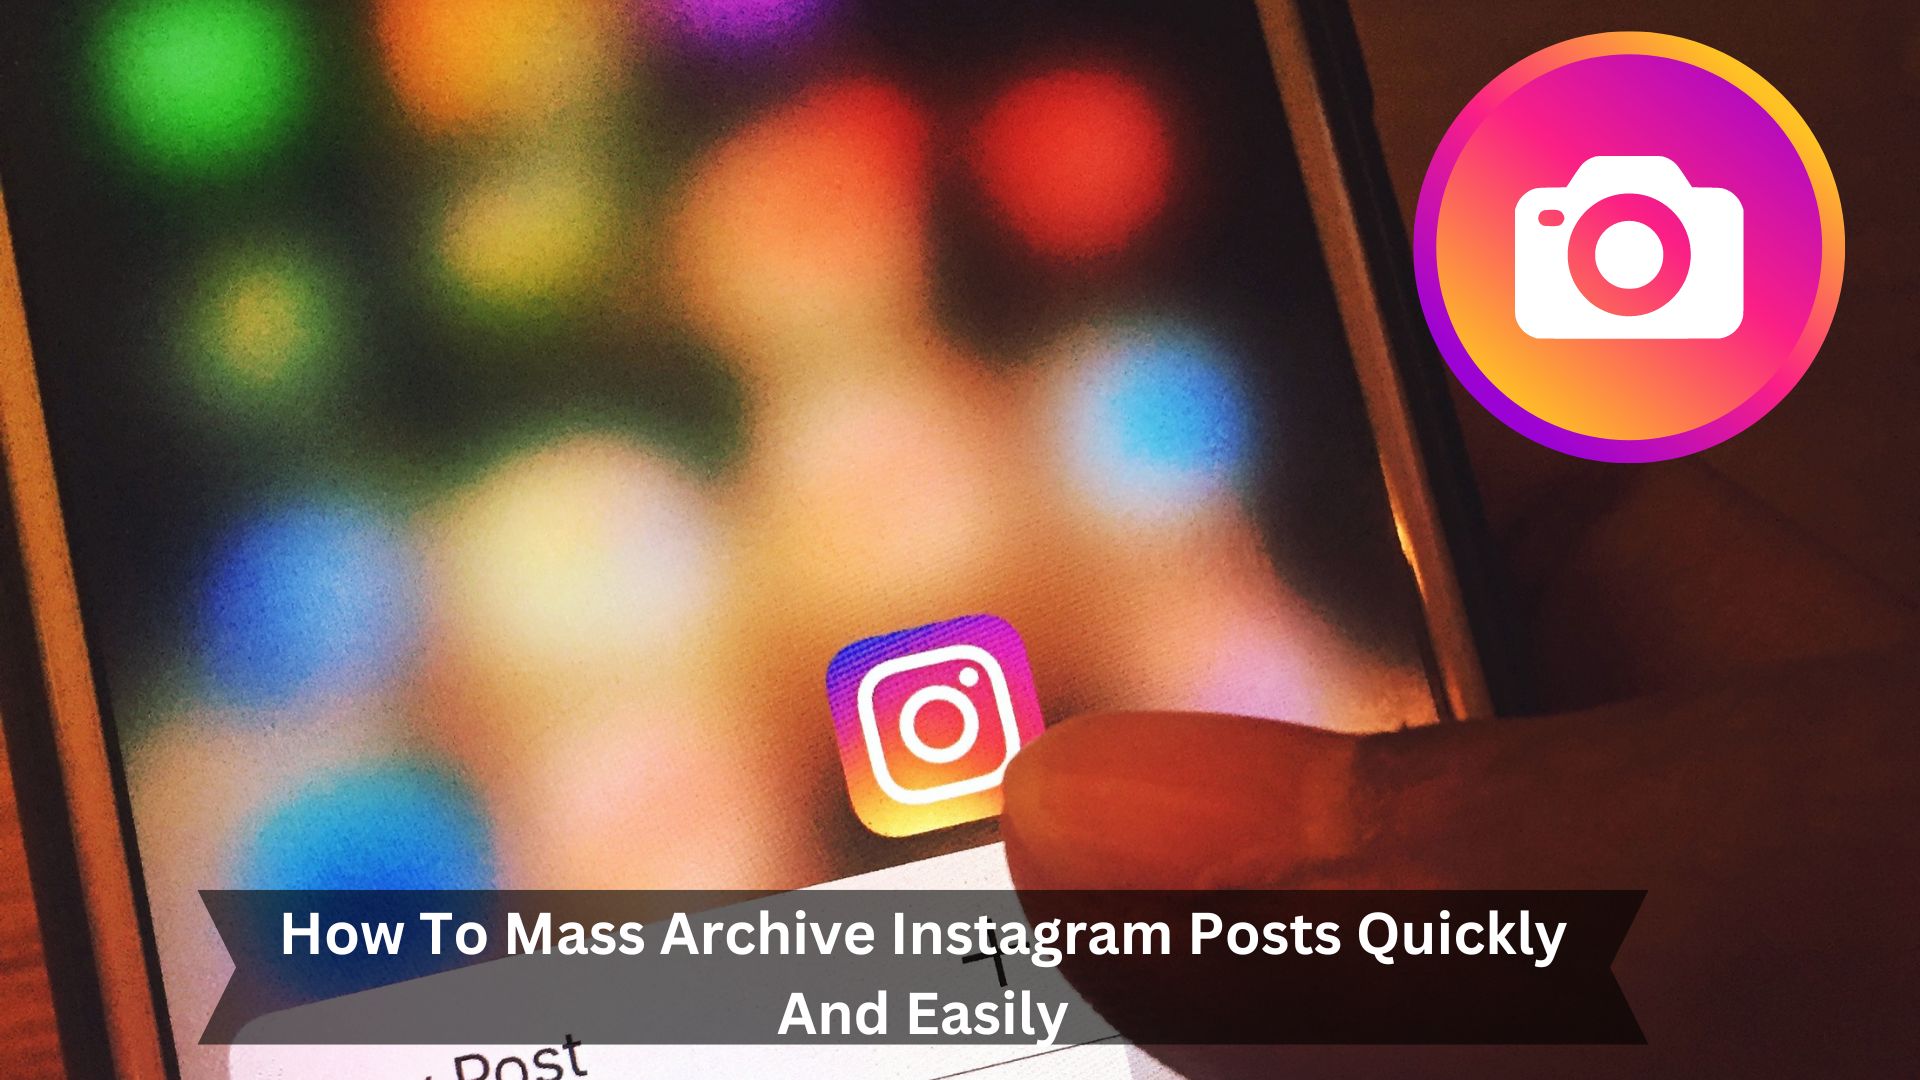 How-To-Mass-Archive-Instagram-Posts-Quickly-And-Easily